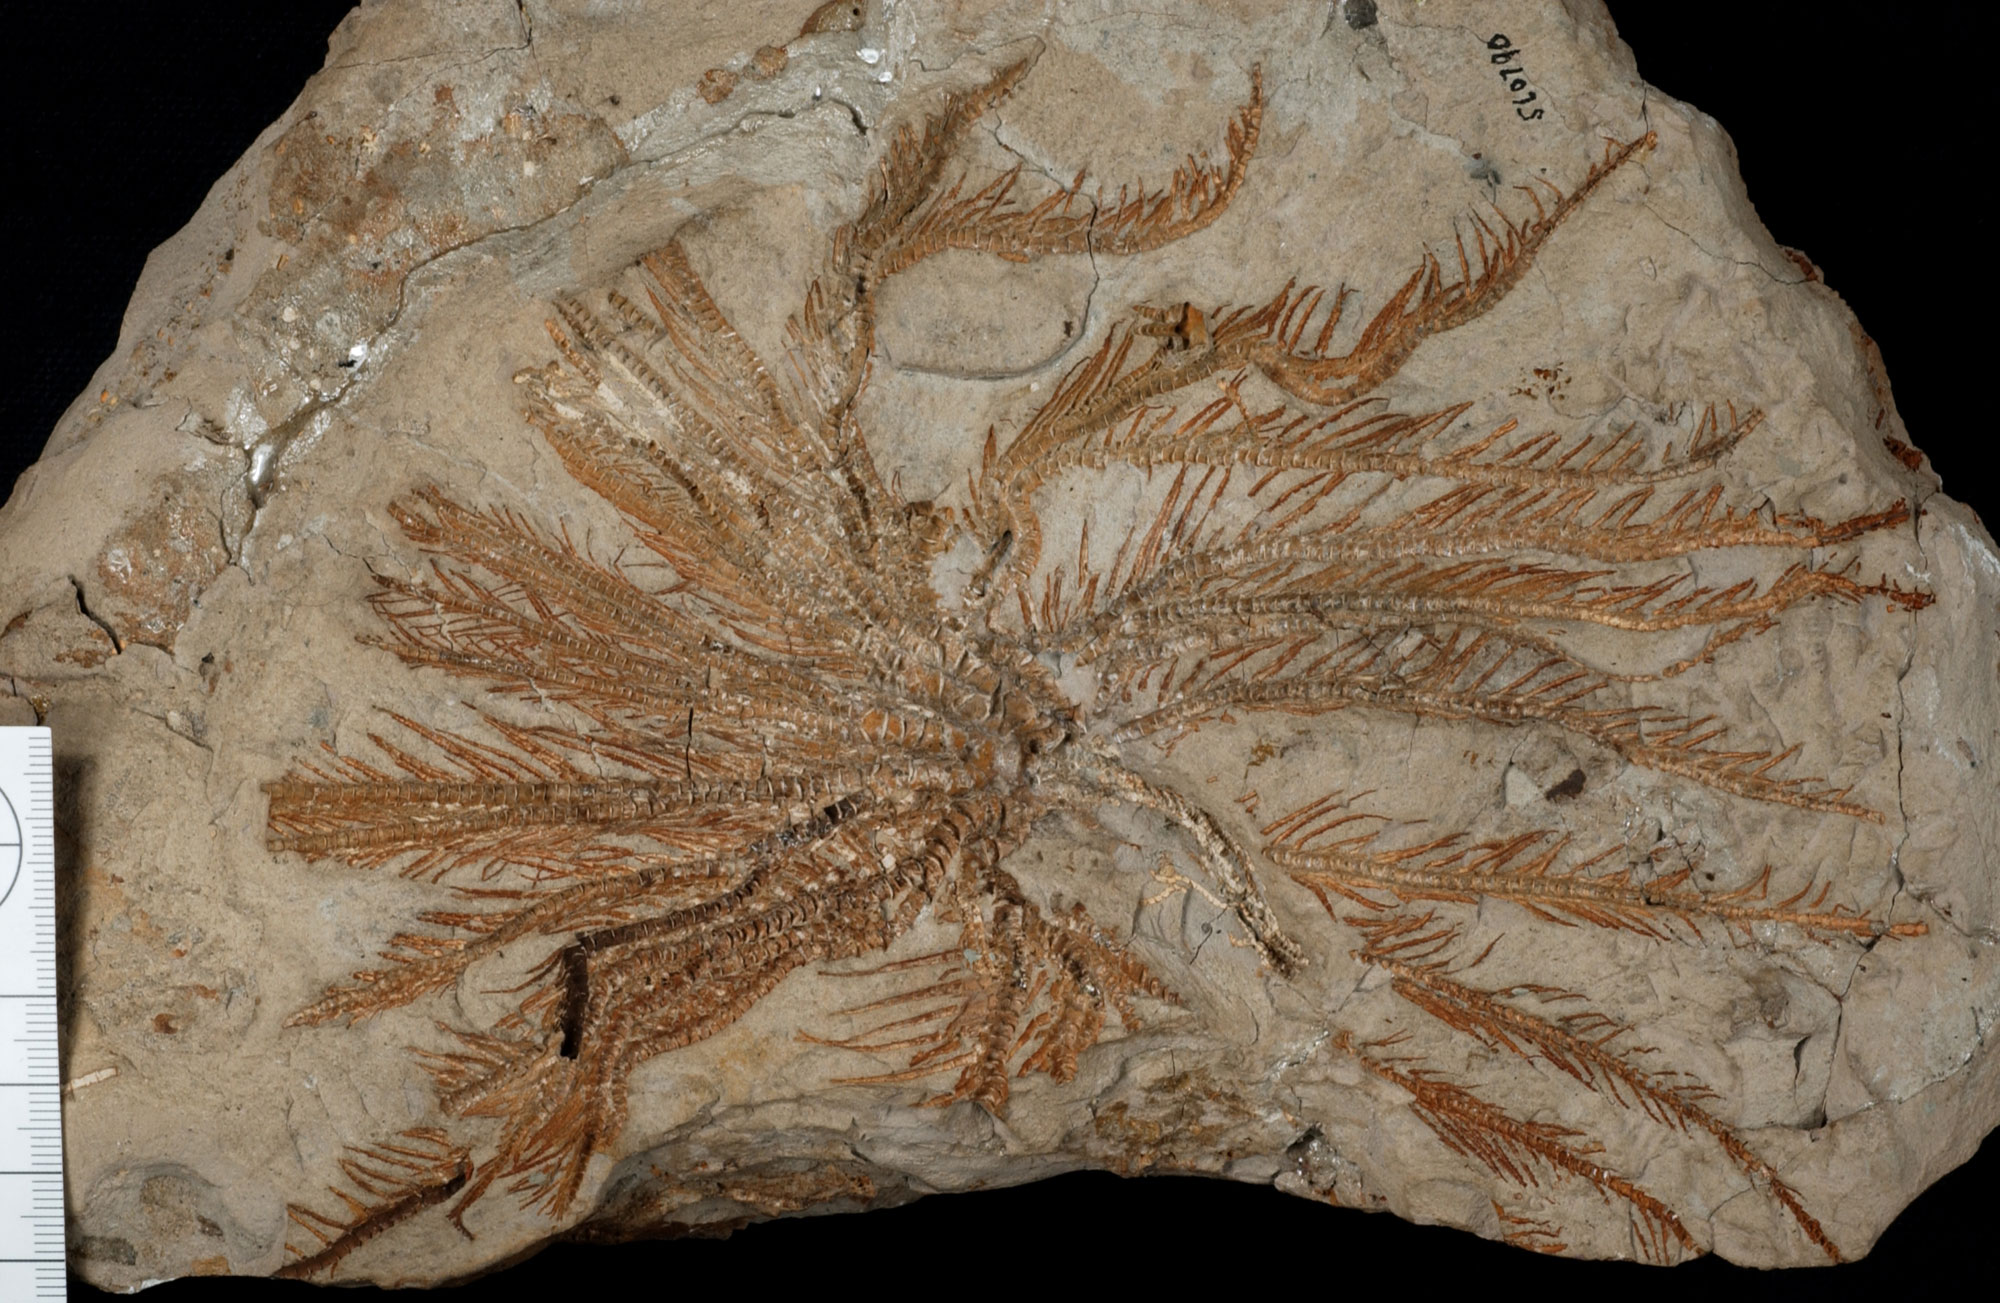 Photograph of the fossil crinoid Isocrinus from the Oligocene of Oregon. The fossil shows the stalk, calyx, and many arms splayed out radially.